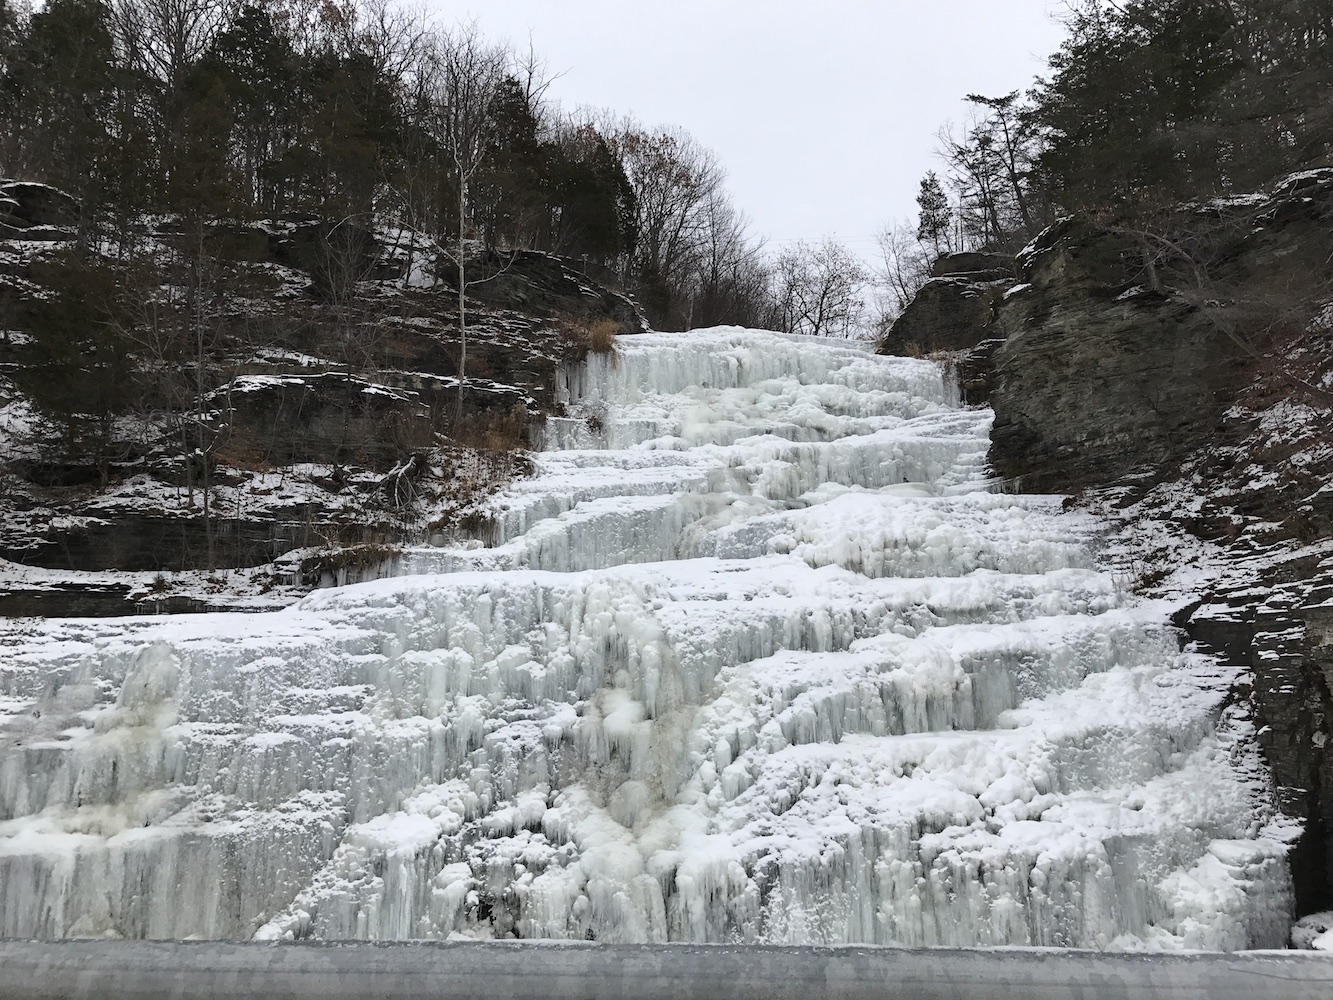 Hector Falls - Ice covered falls